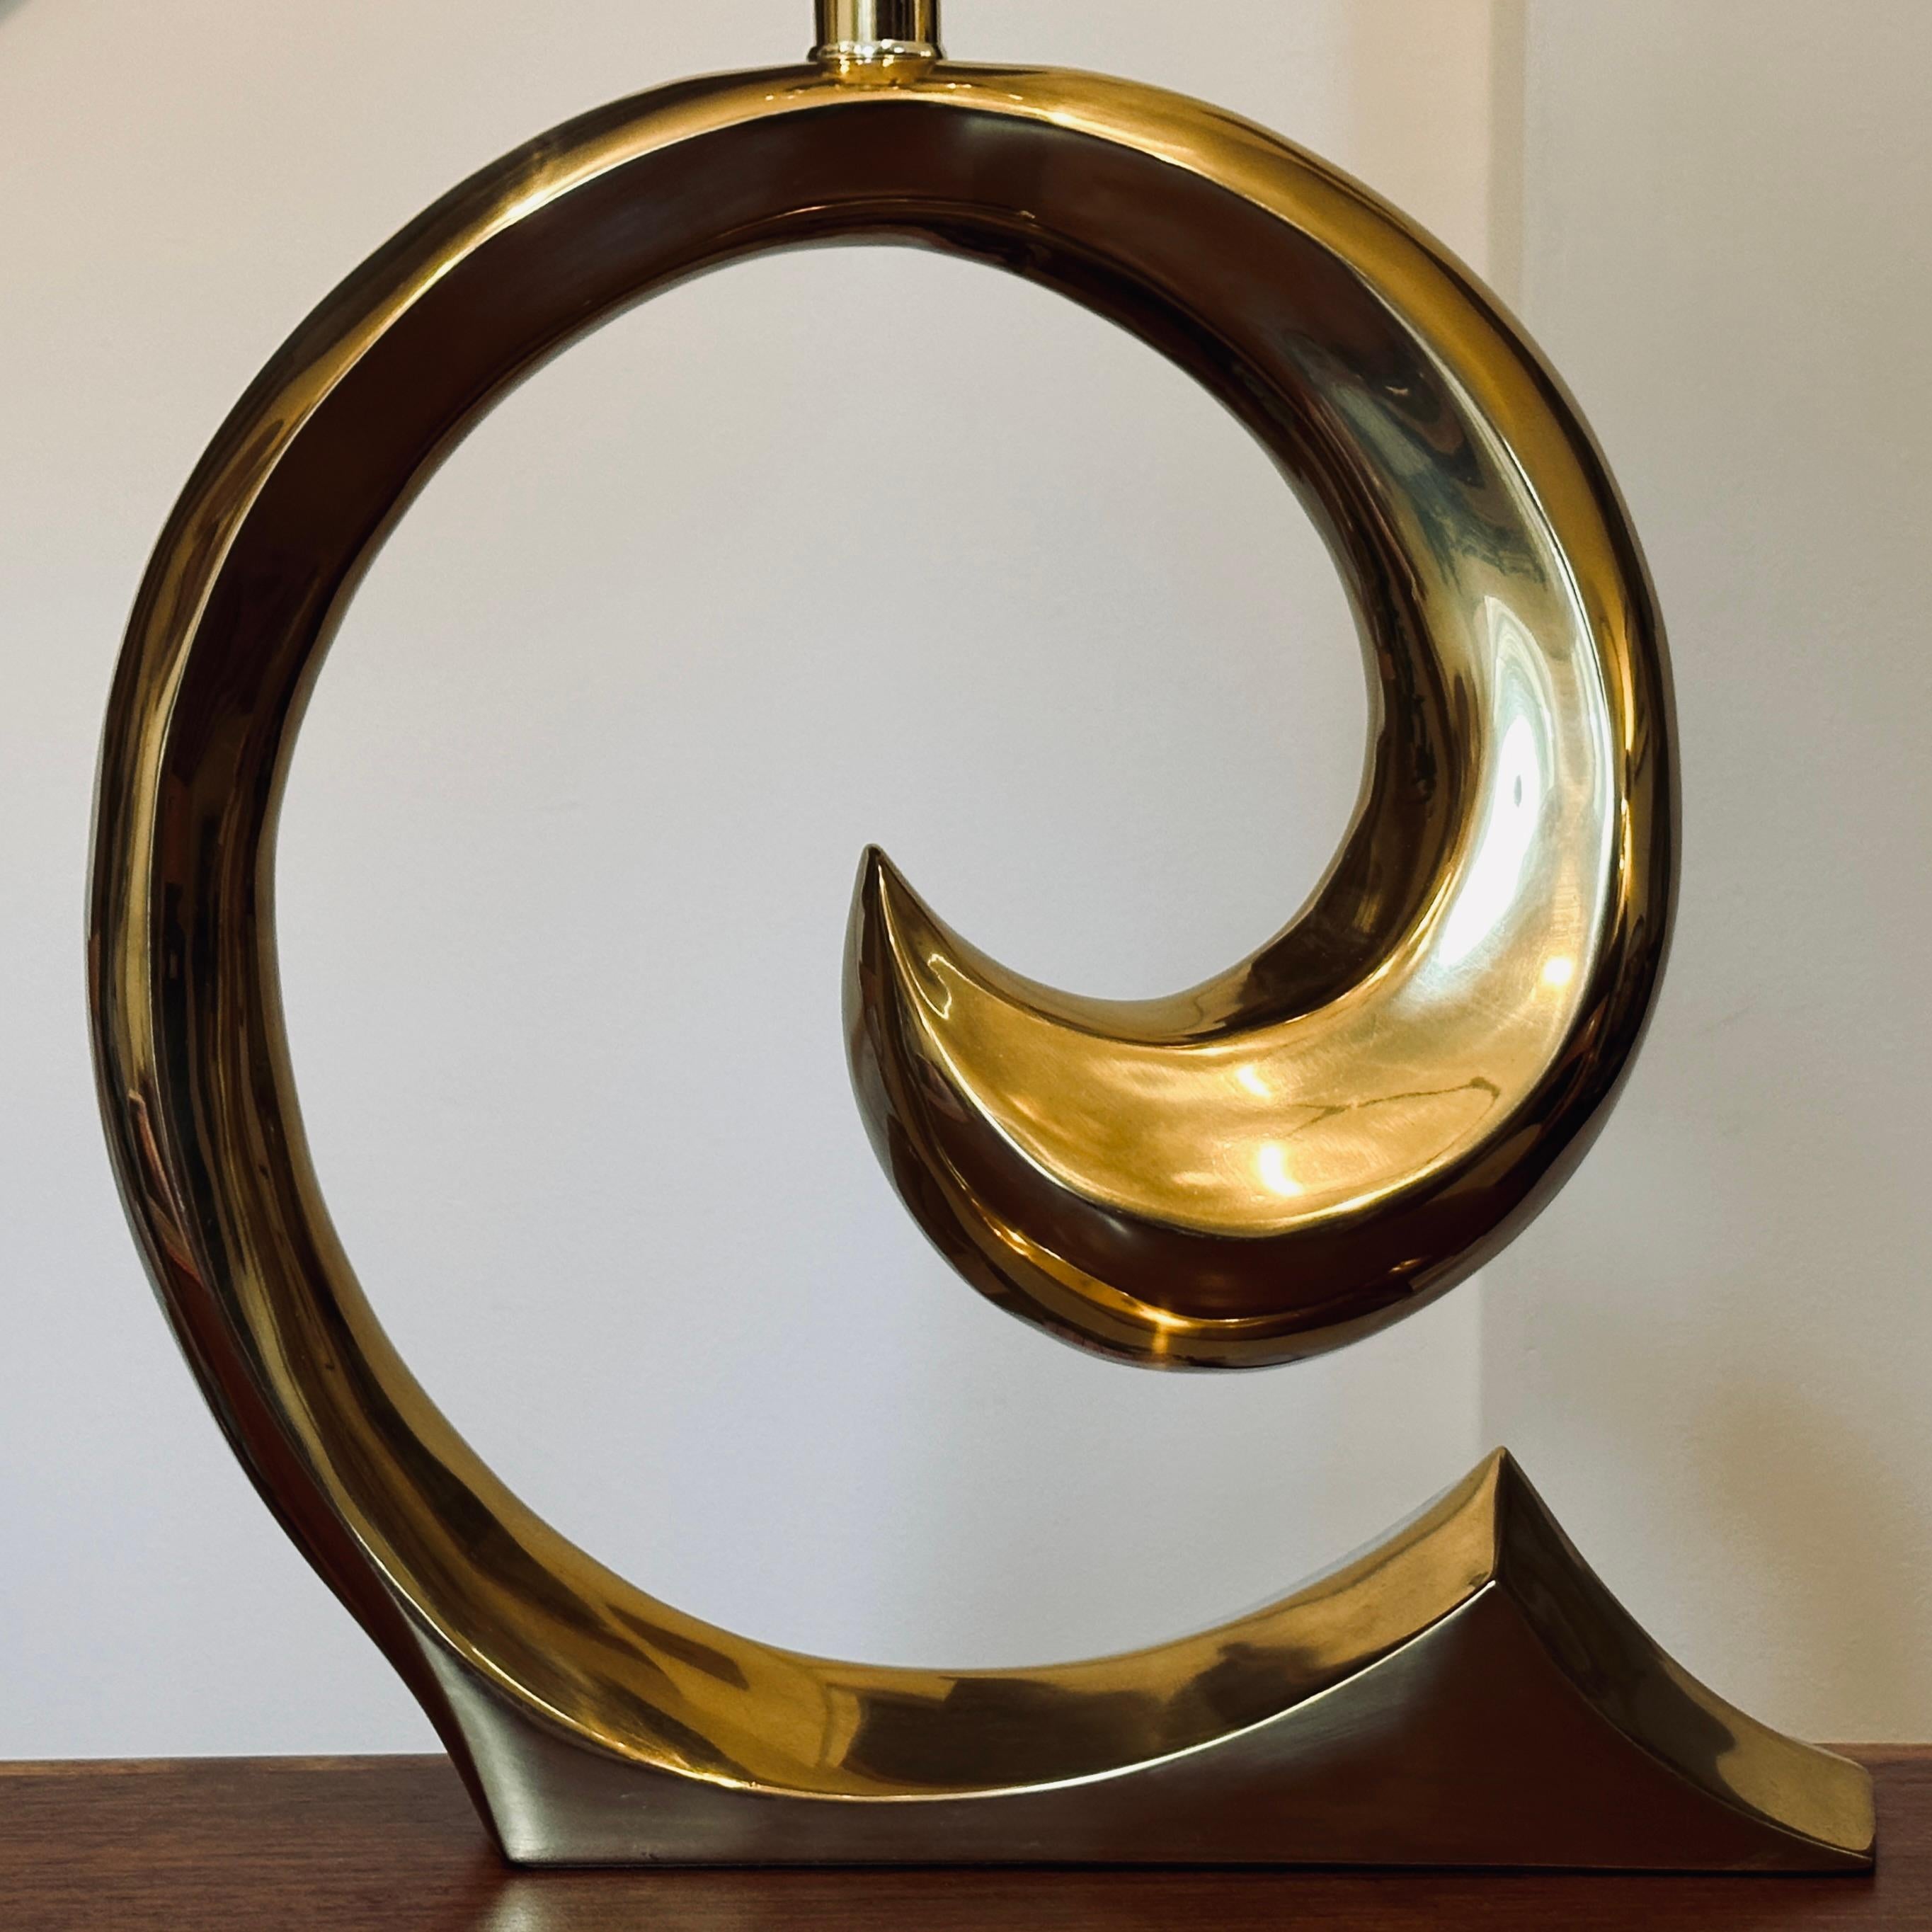 Amazing statement table lamp in a sculptural wave form designed by Erwin Lambeth with the original patent design number label intact to the left of the cord hole. Often attributed to Pierre Cardin. The footprint of the felted base measures roughly